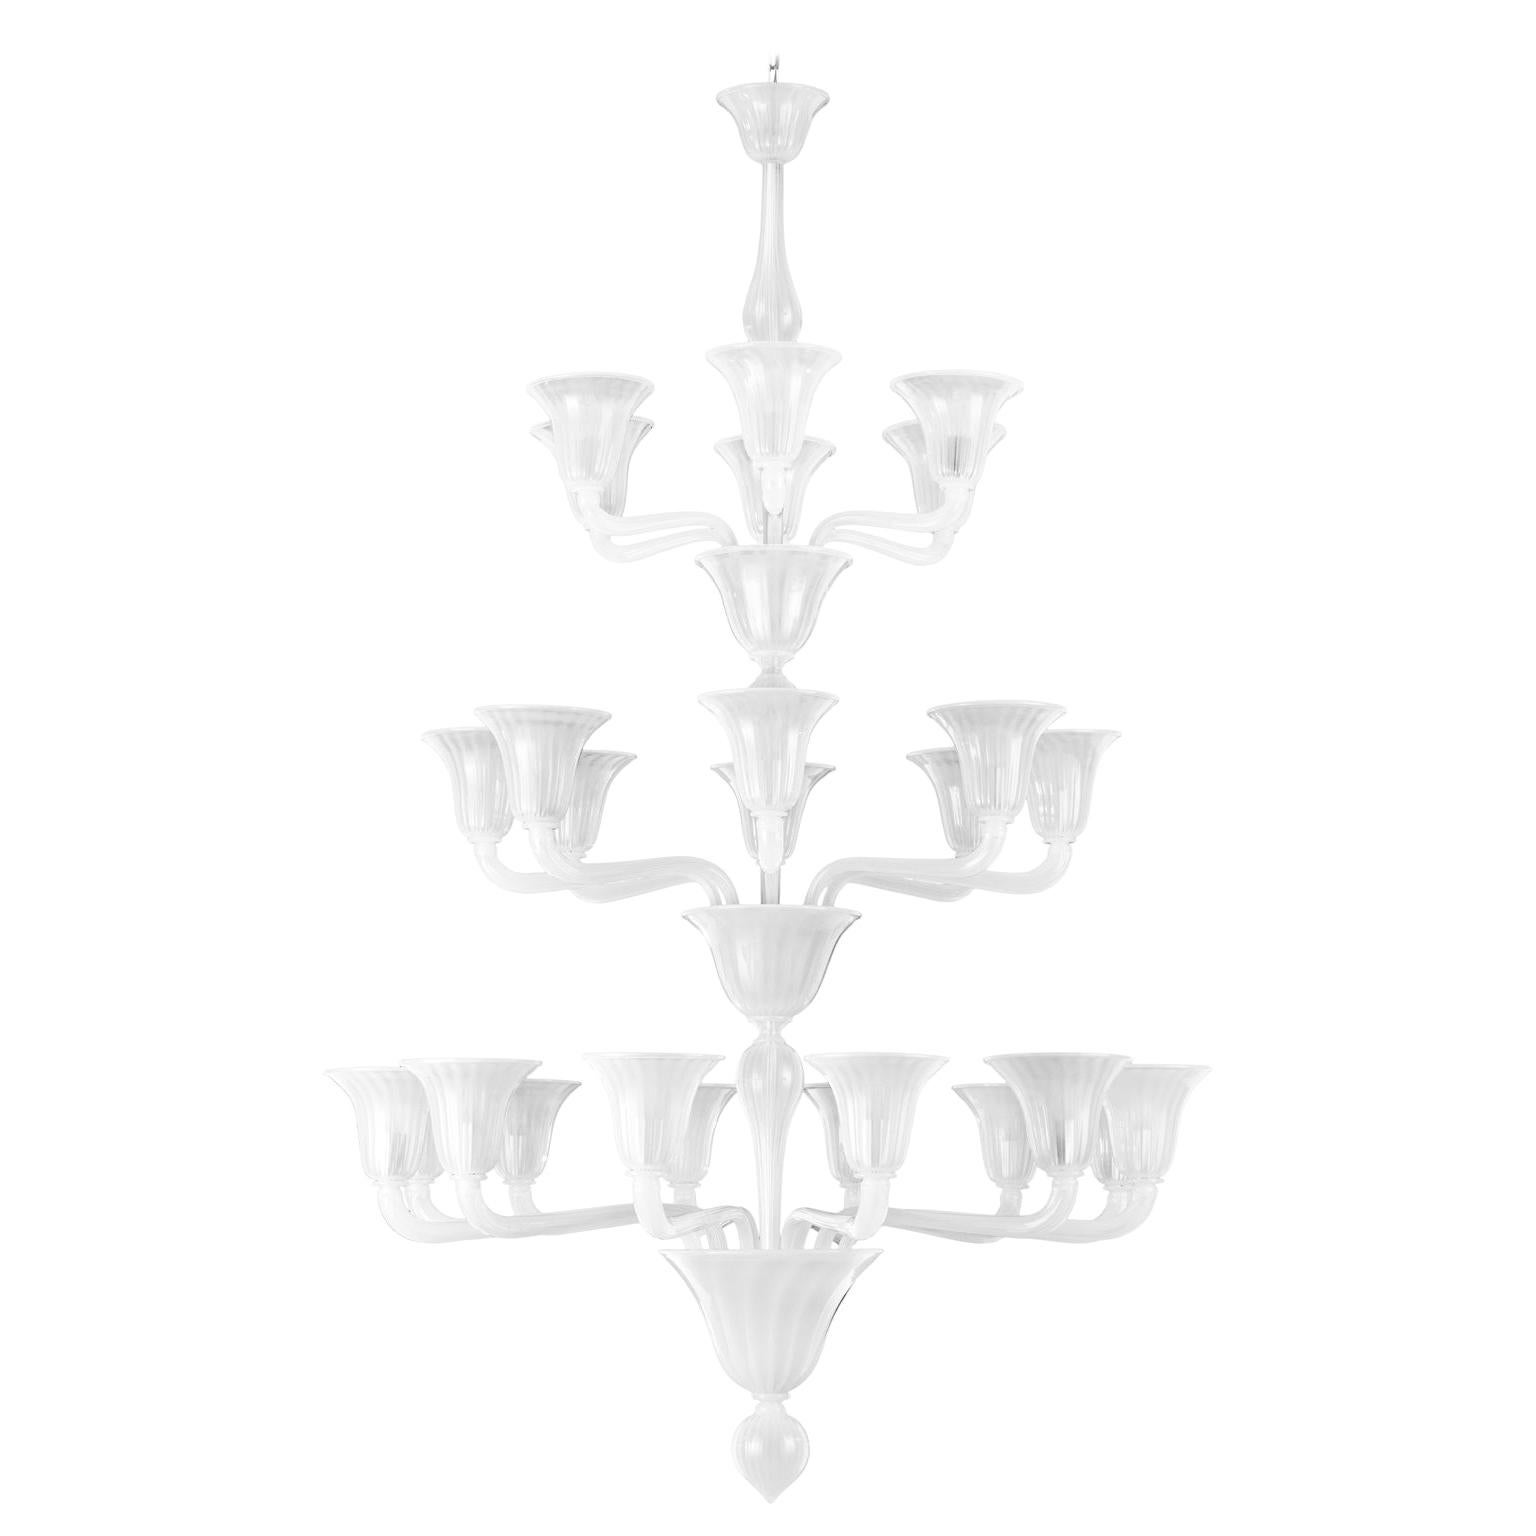 Chandelier 26 arms 3 Tiers, Silk Rigadin Murano Glass by Multiforme